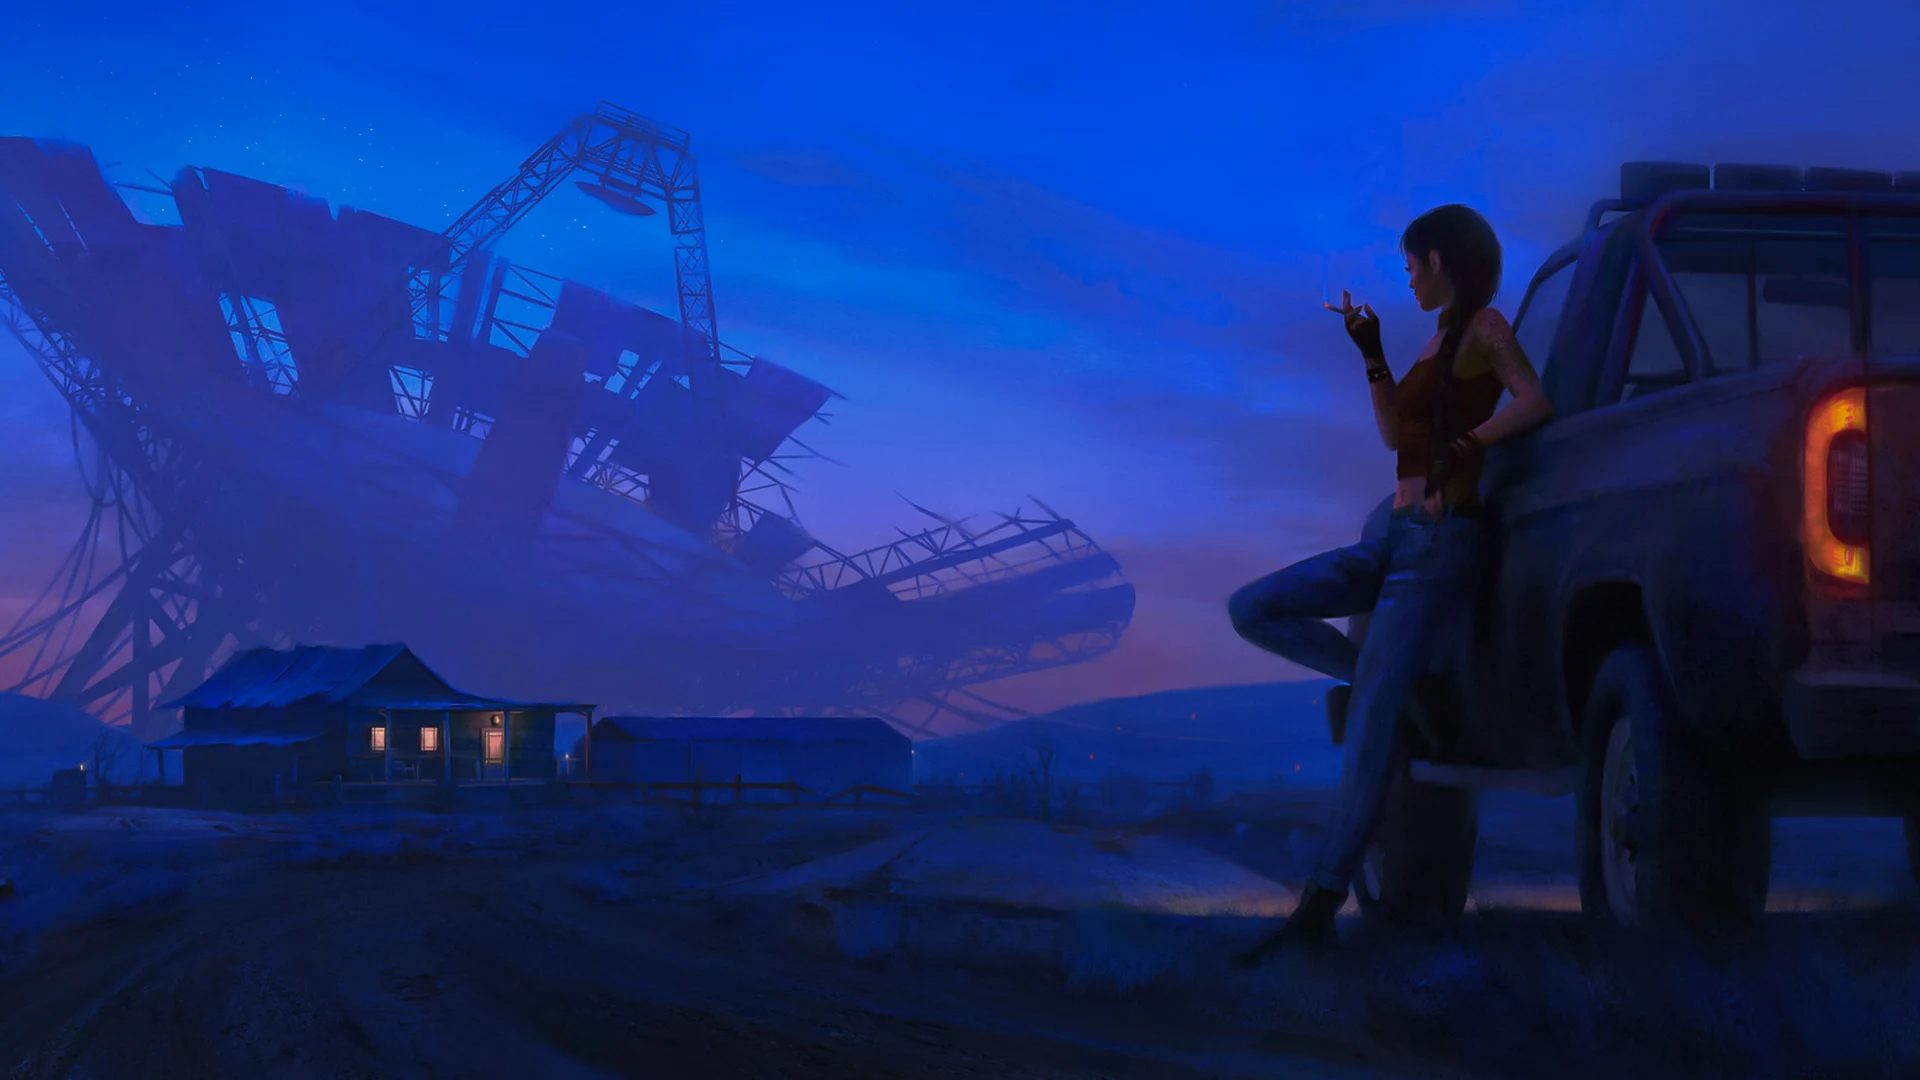 a woman smoking propped up in a van while looking at a landscape where there is a house with lights and giant antennas in the background. Sci-fi style.